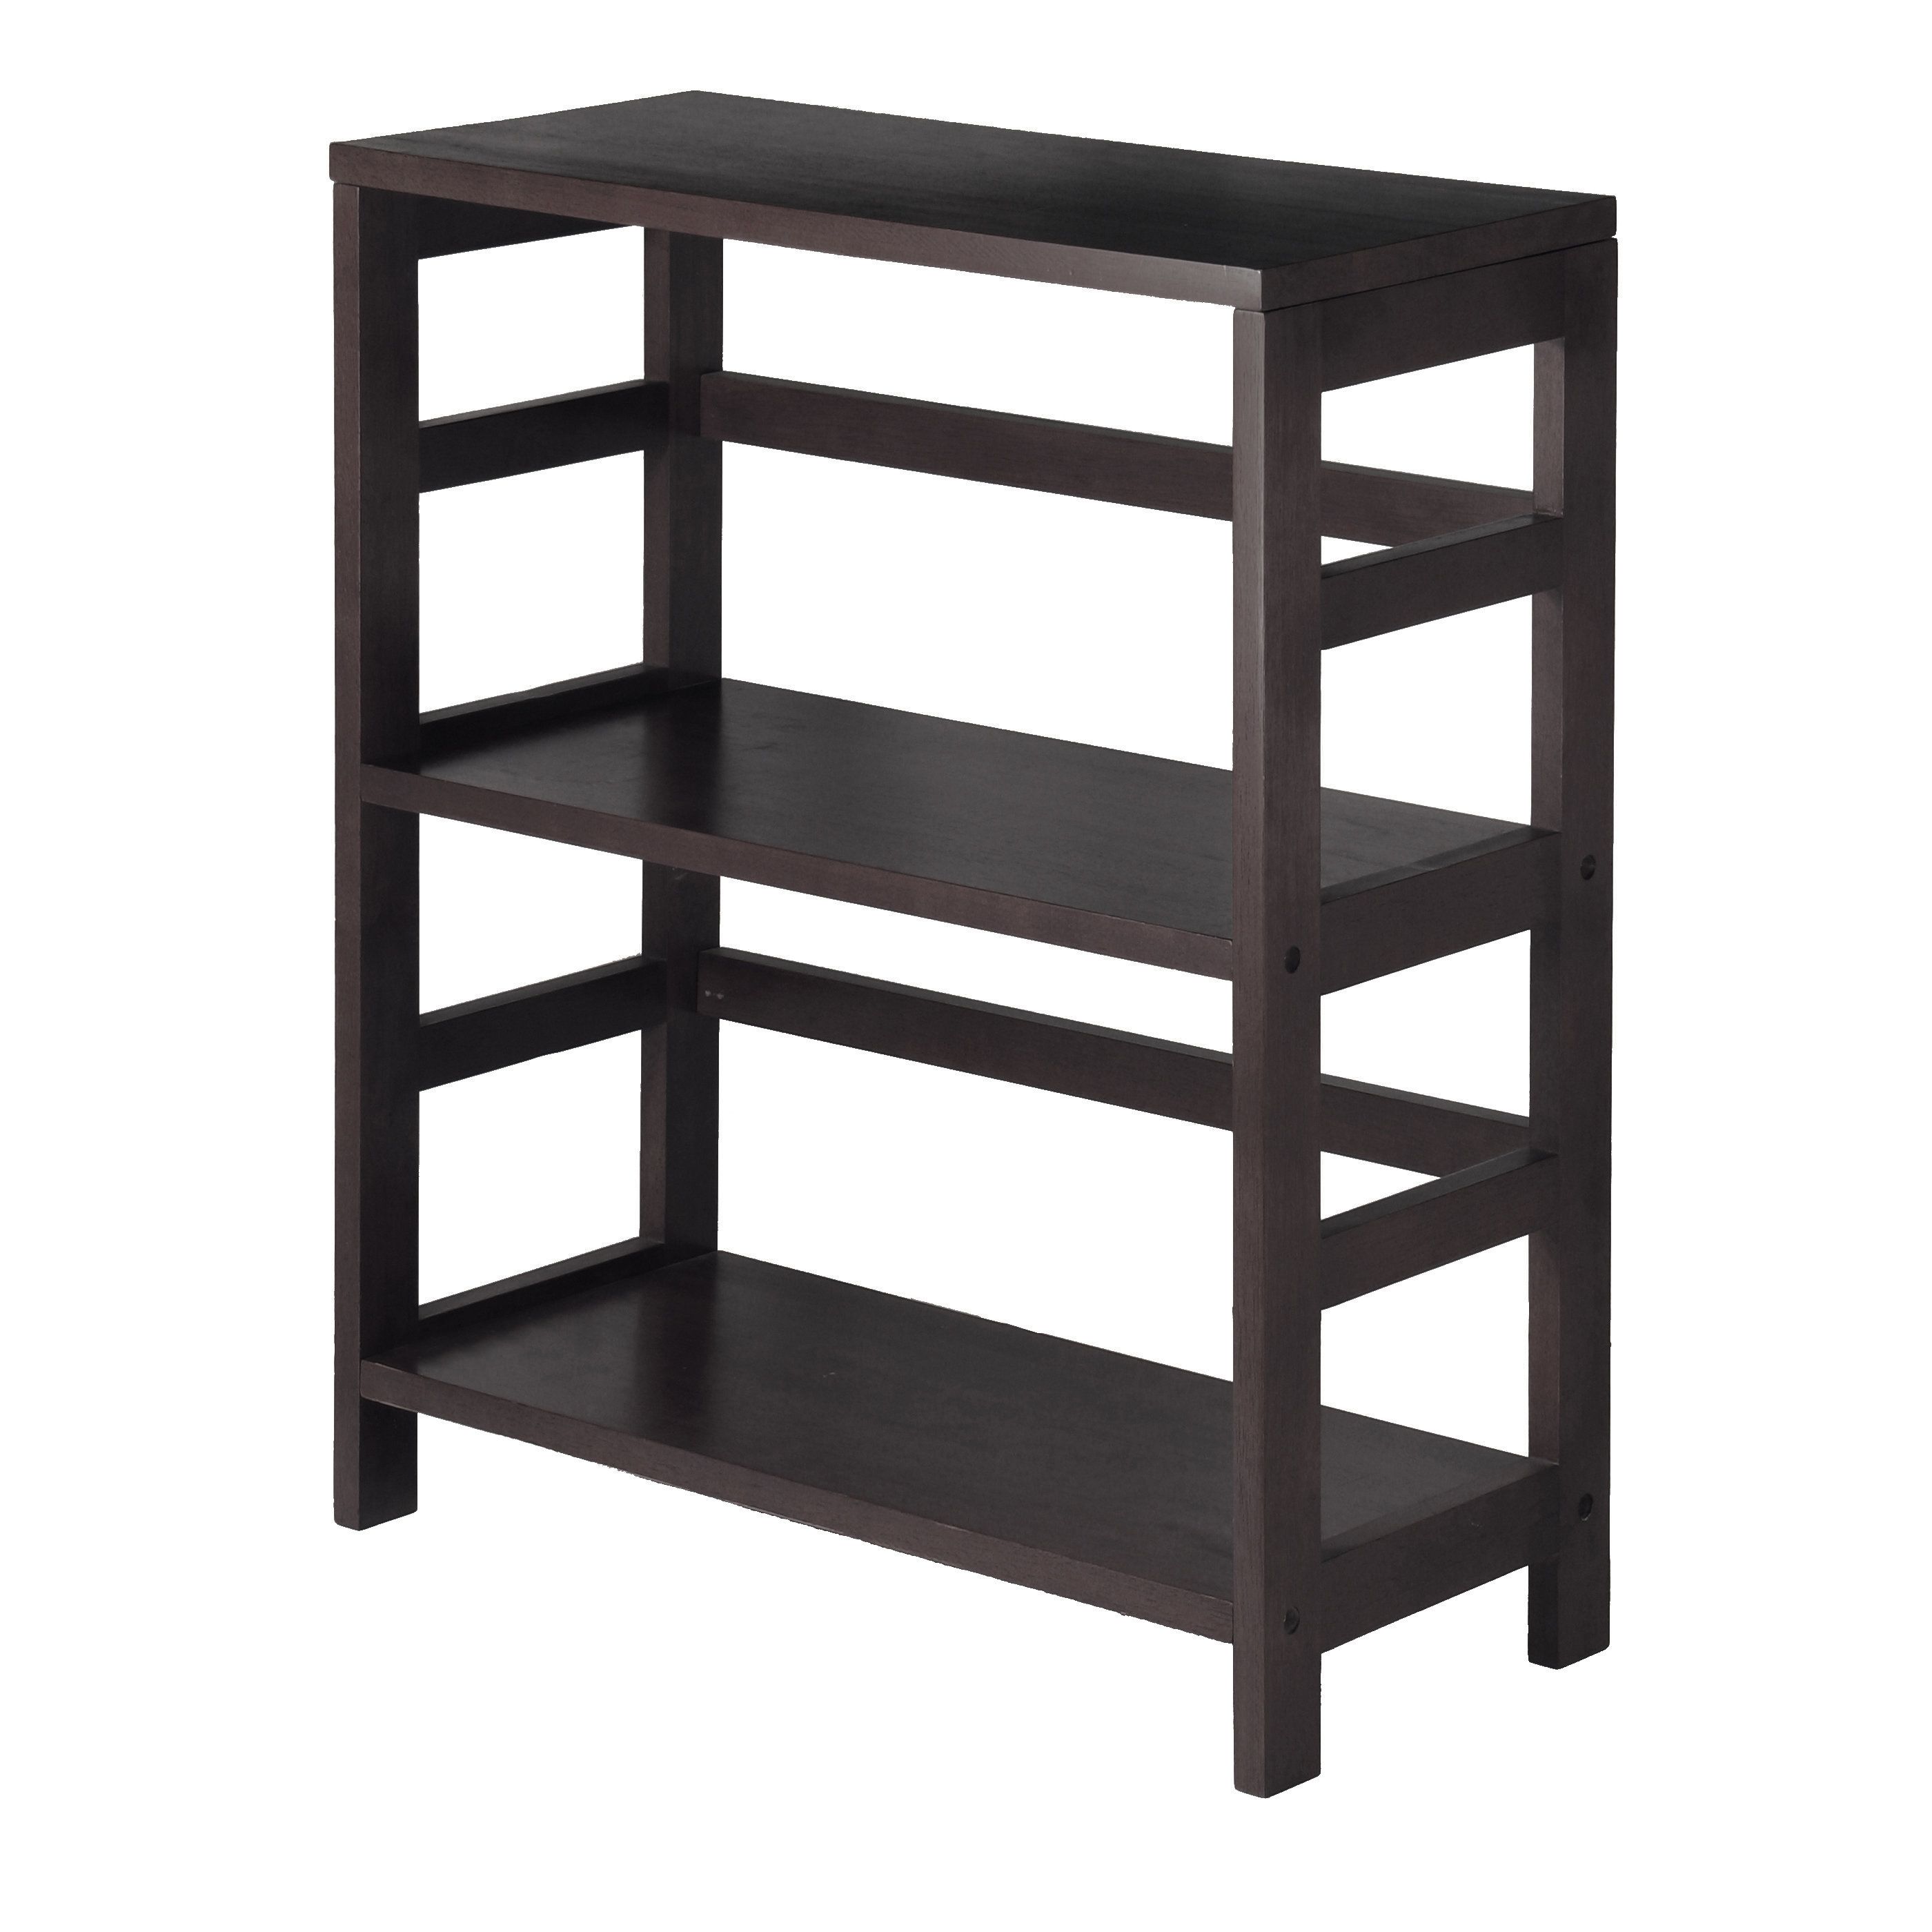 Widely Used Red Barrel Studio Maryln Standard Bookcase & Reviews (View 1 of 20)